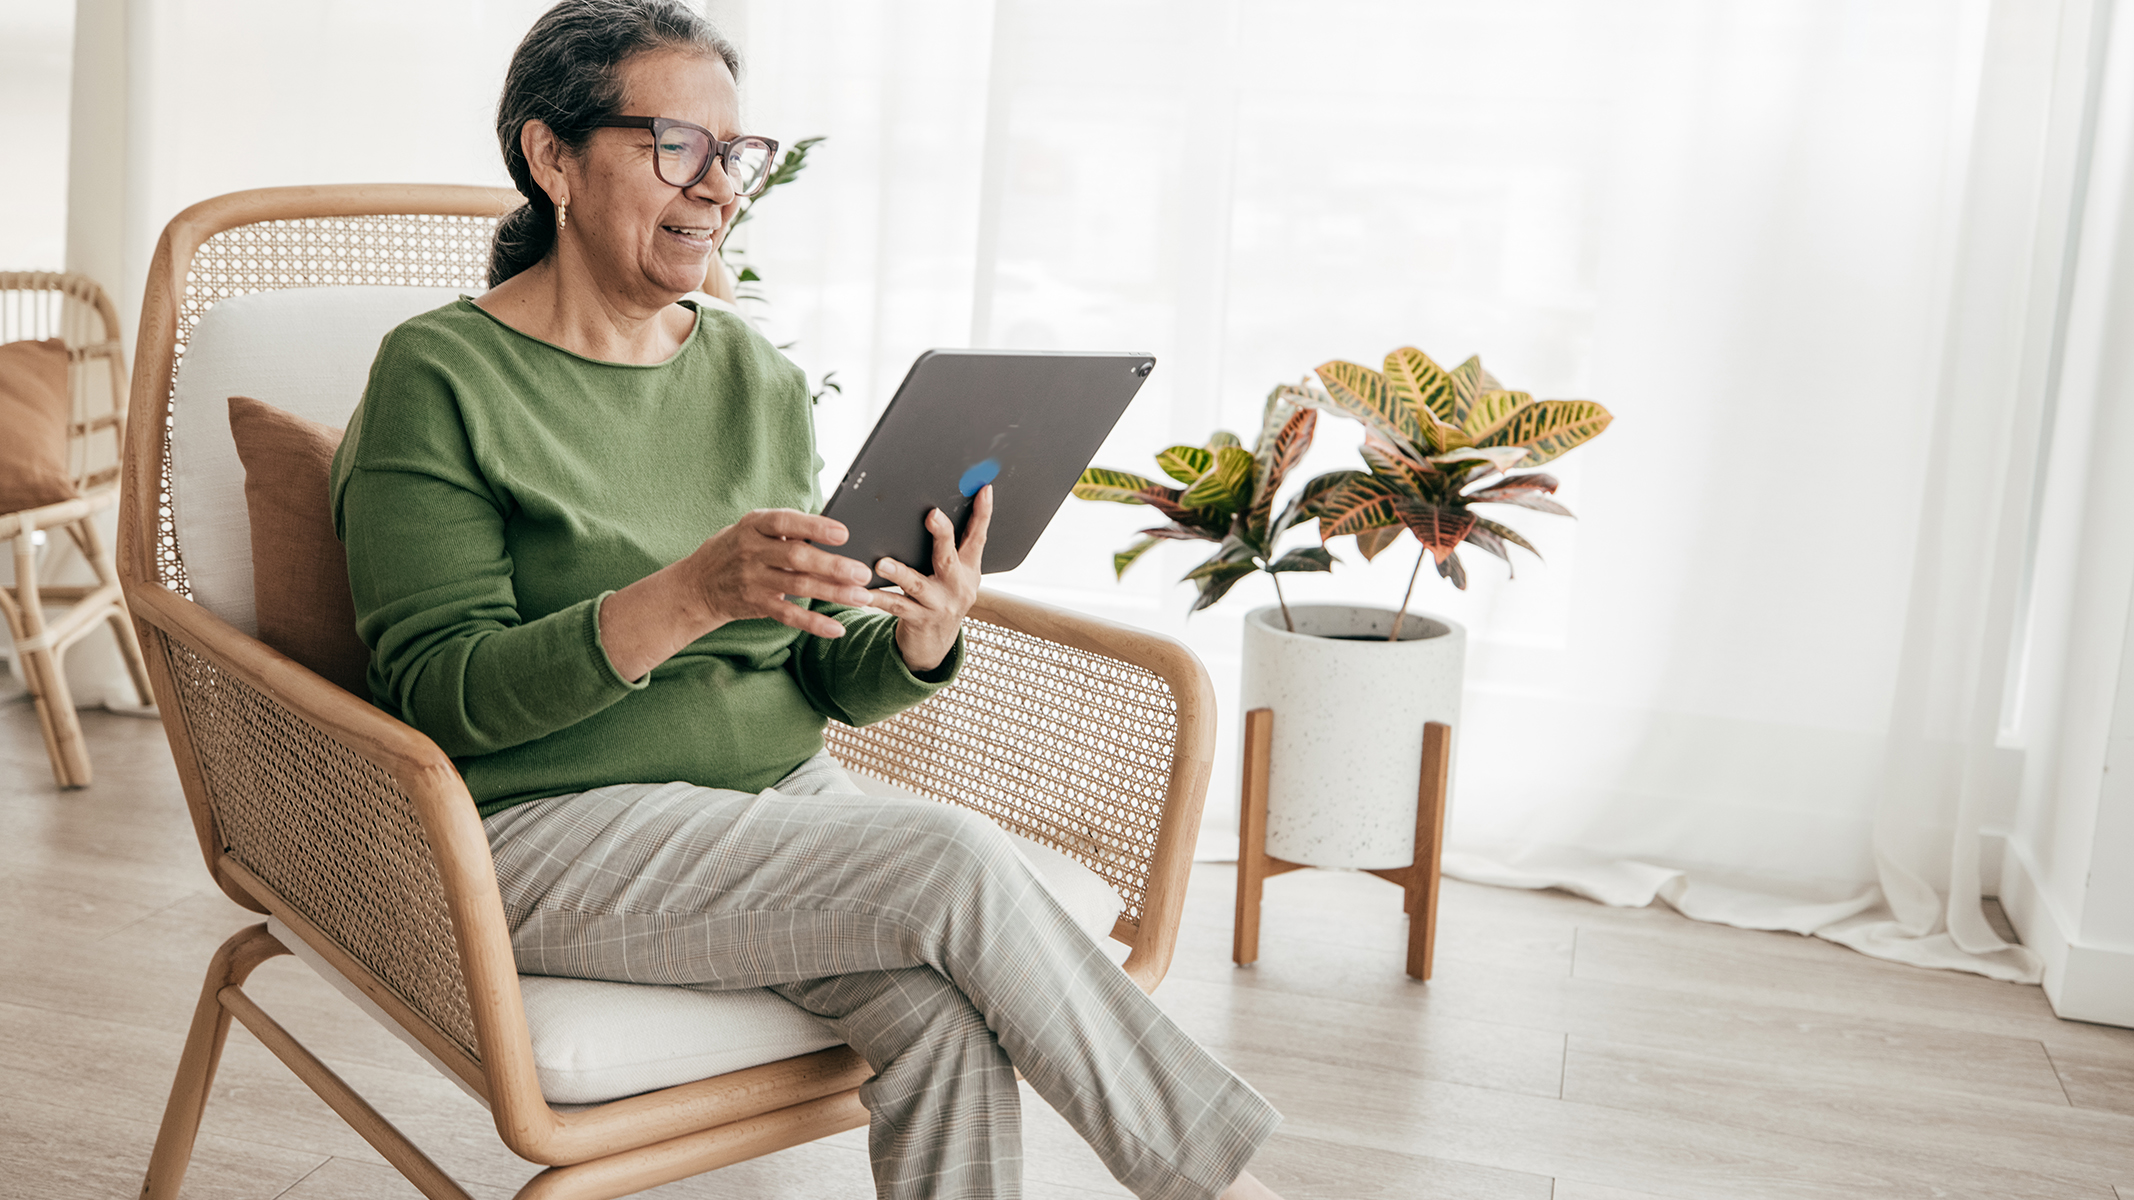  Senior woman sitting looking at tablet device.